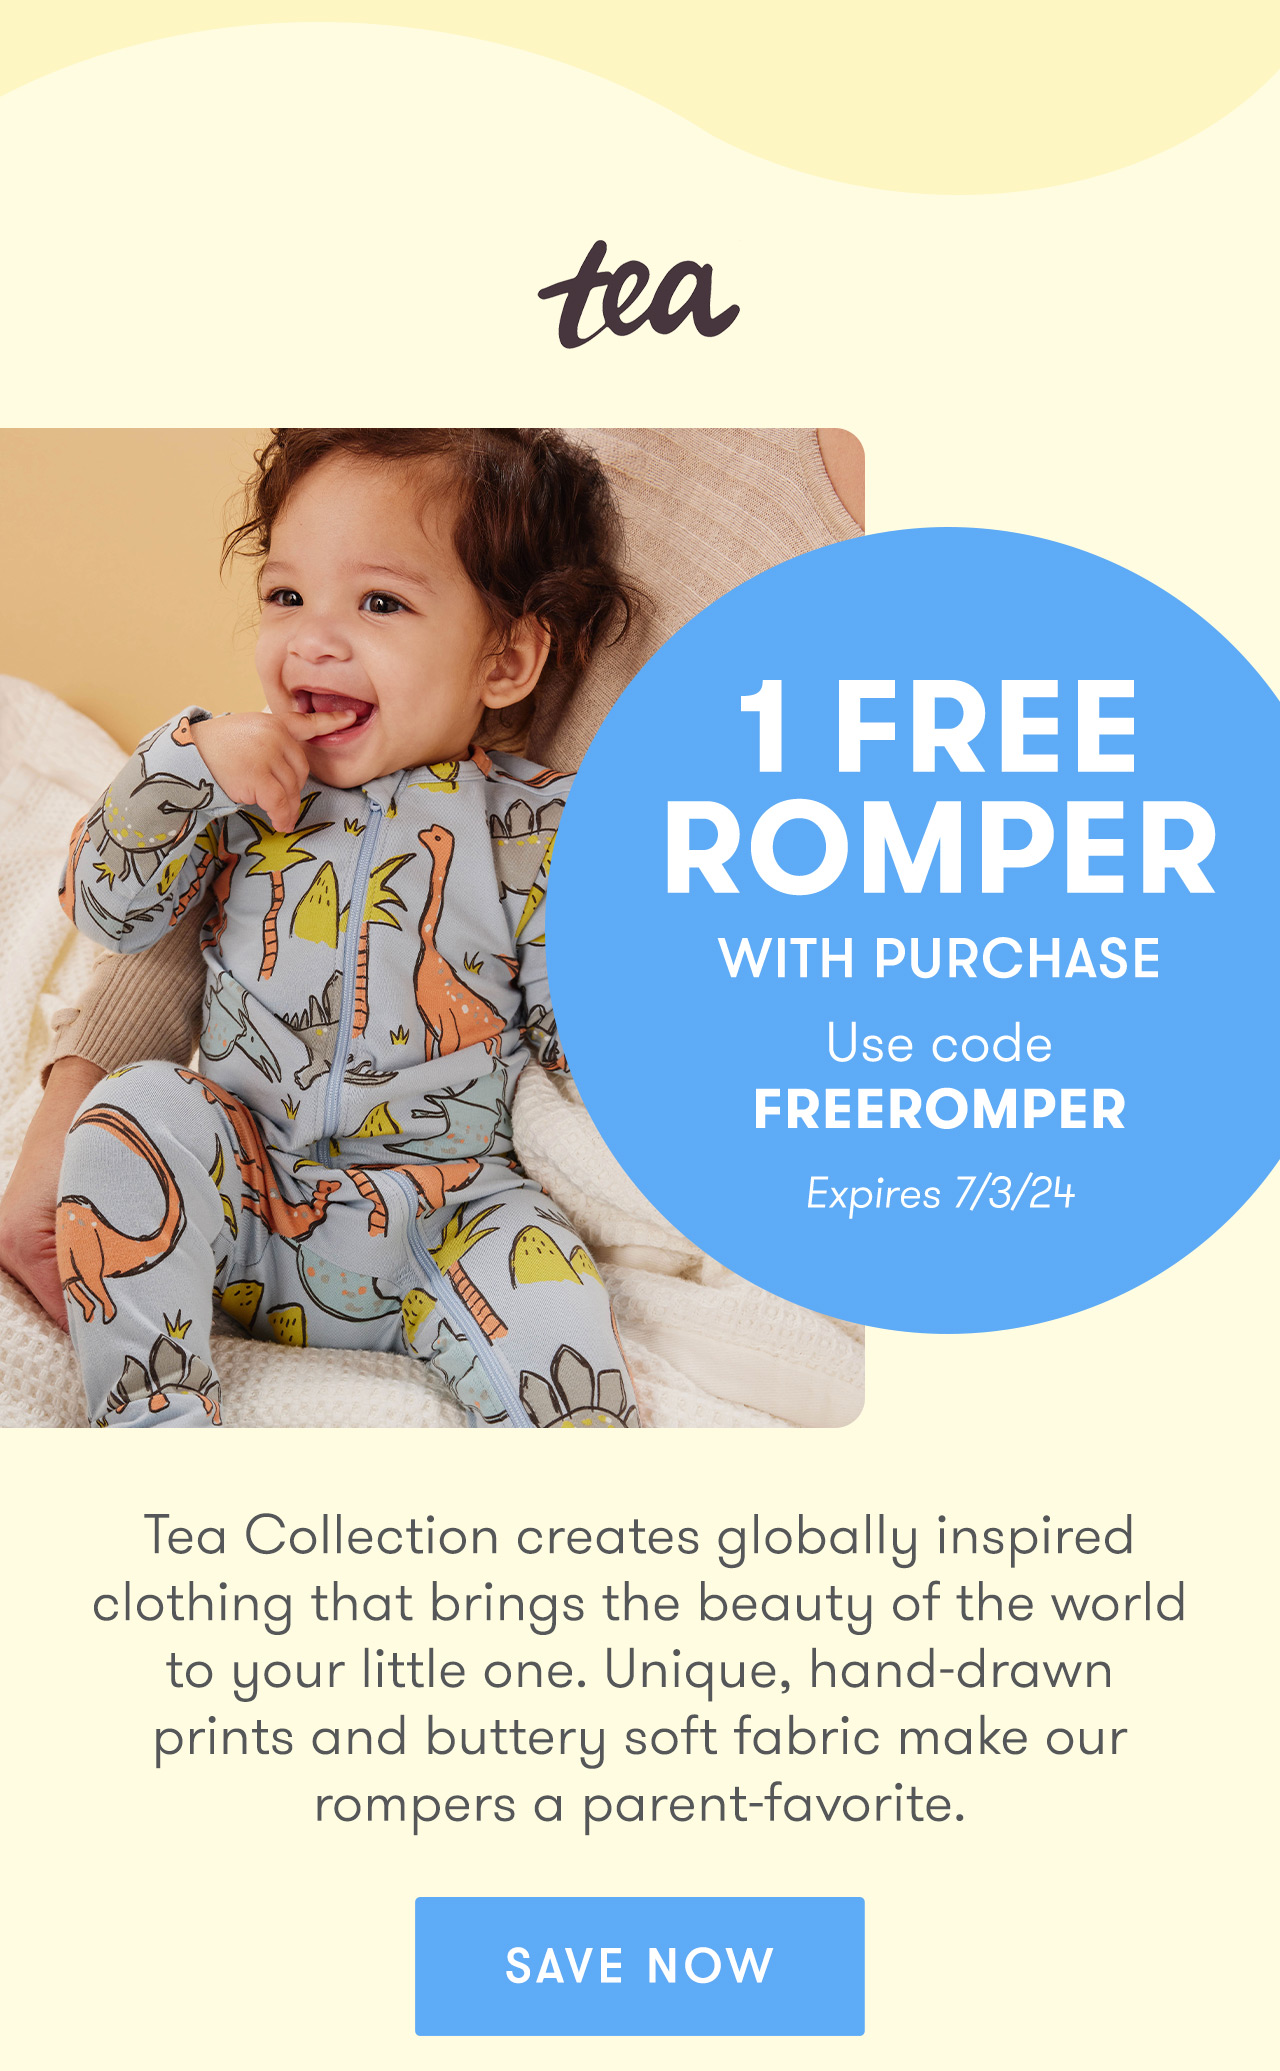 tea: 1 Free Romper with purchase using code FREEROMPER